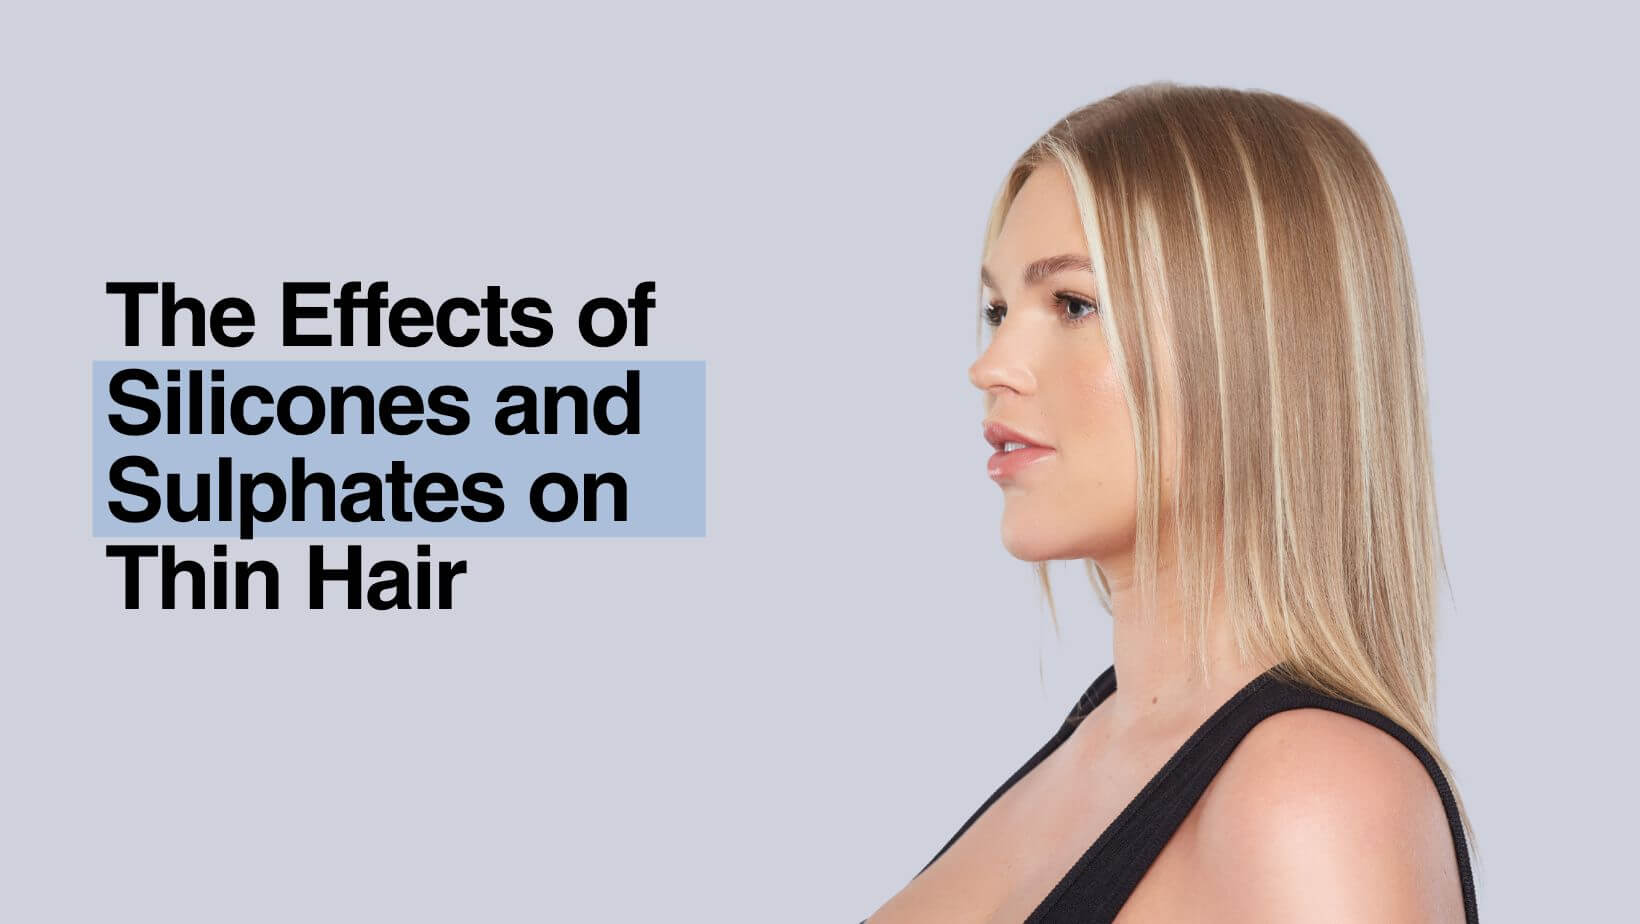 The Effects of Silicones and Sulphates on Thin Hair